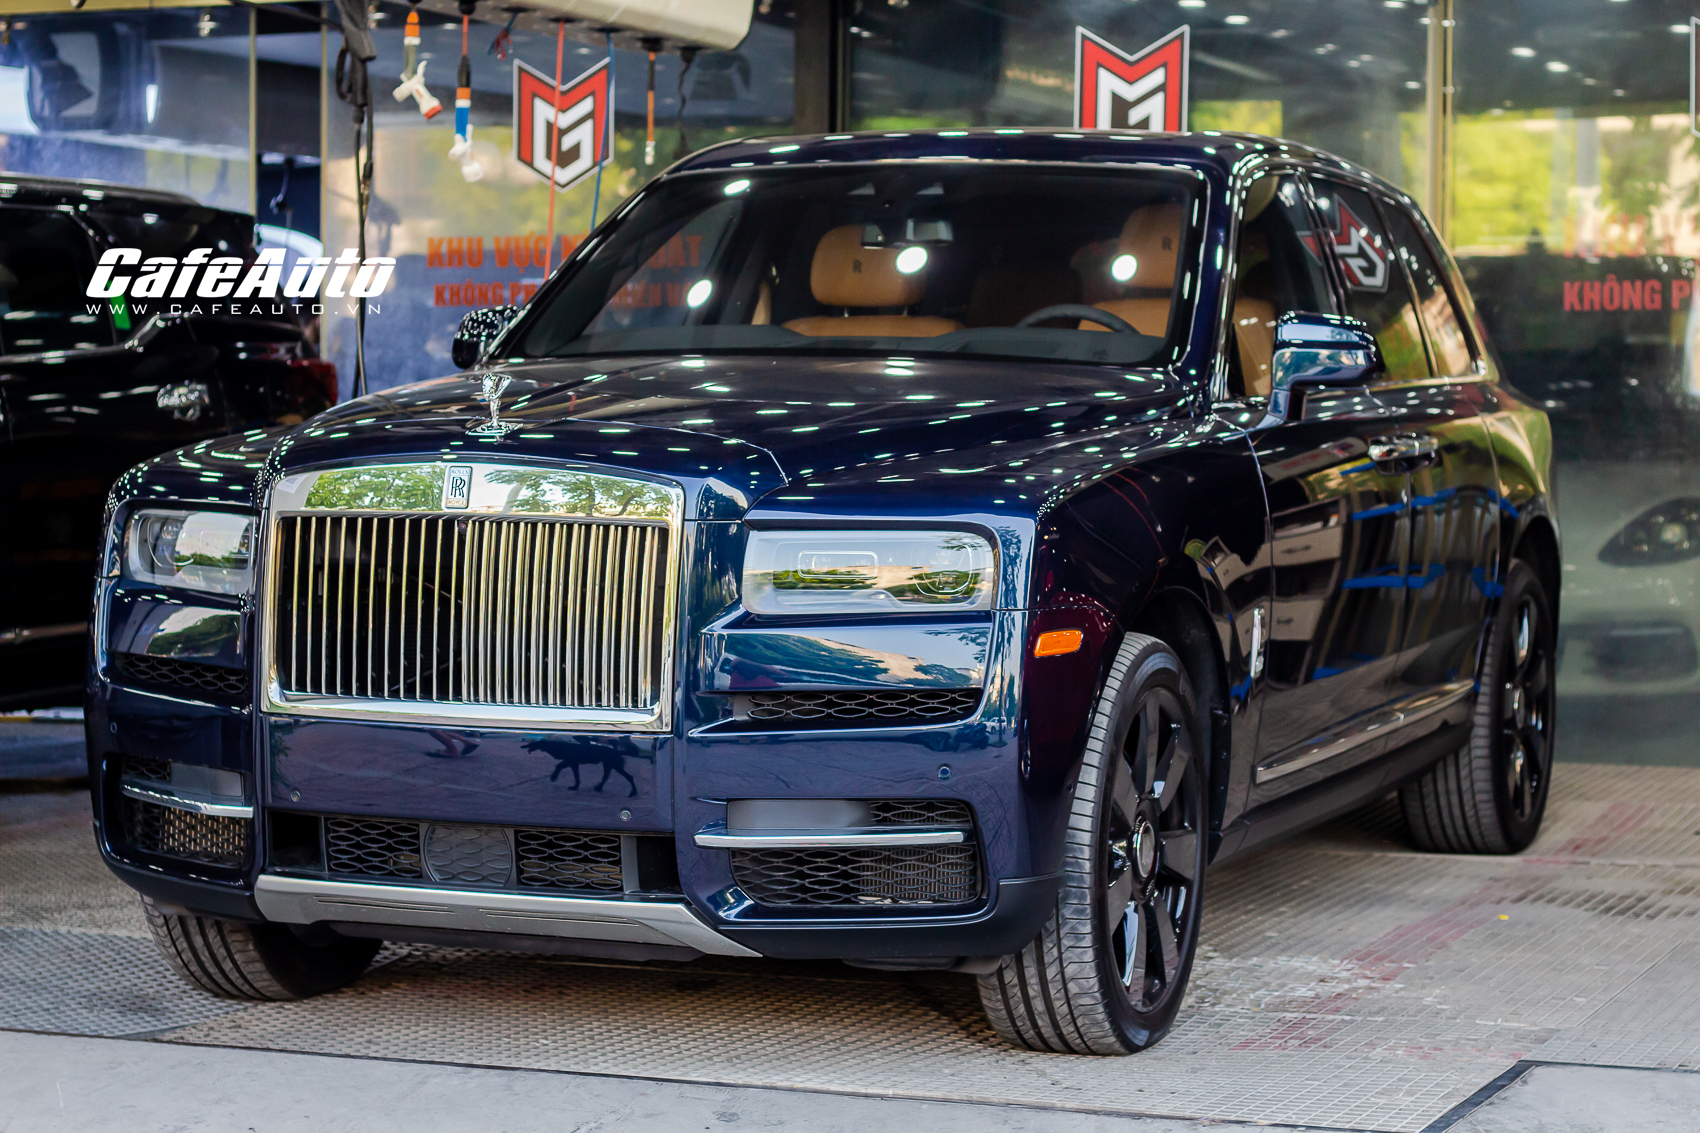 Road Test Review  2021 Rolls Royce Cullinan Black Badge  Rolls Makes A  Performance SUV And The World Takes Notice  LATEST NEWS   CarRevsDailycom